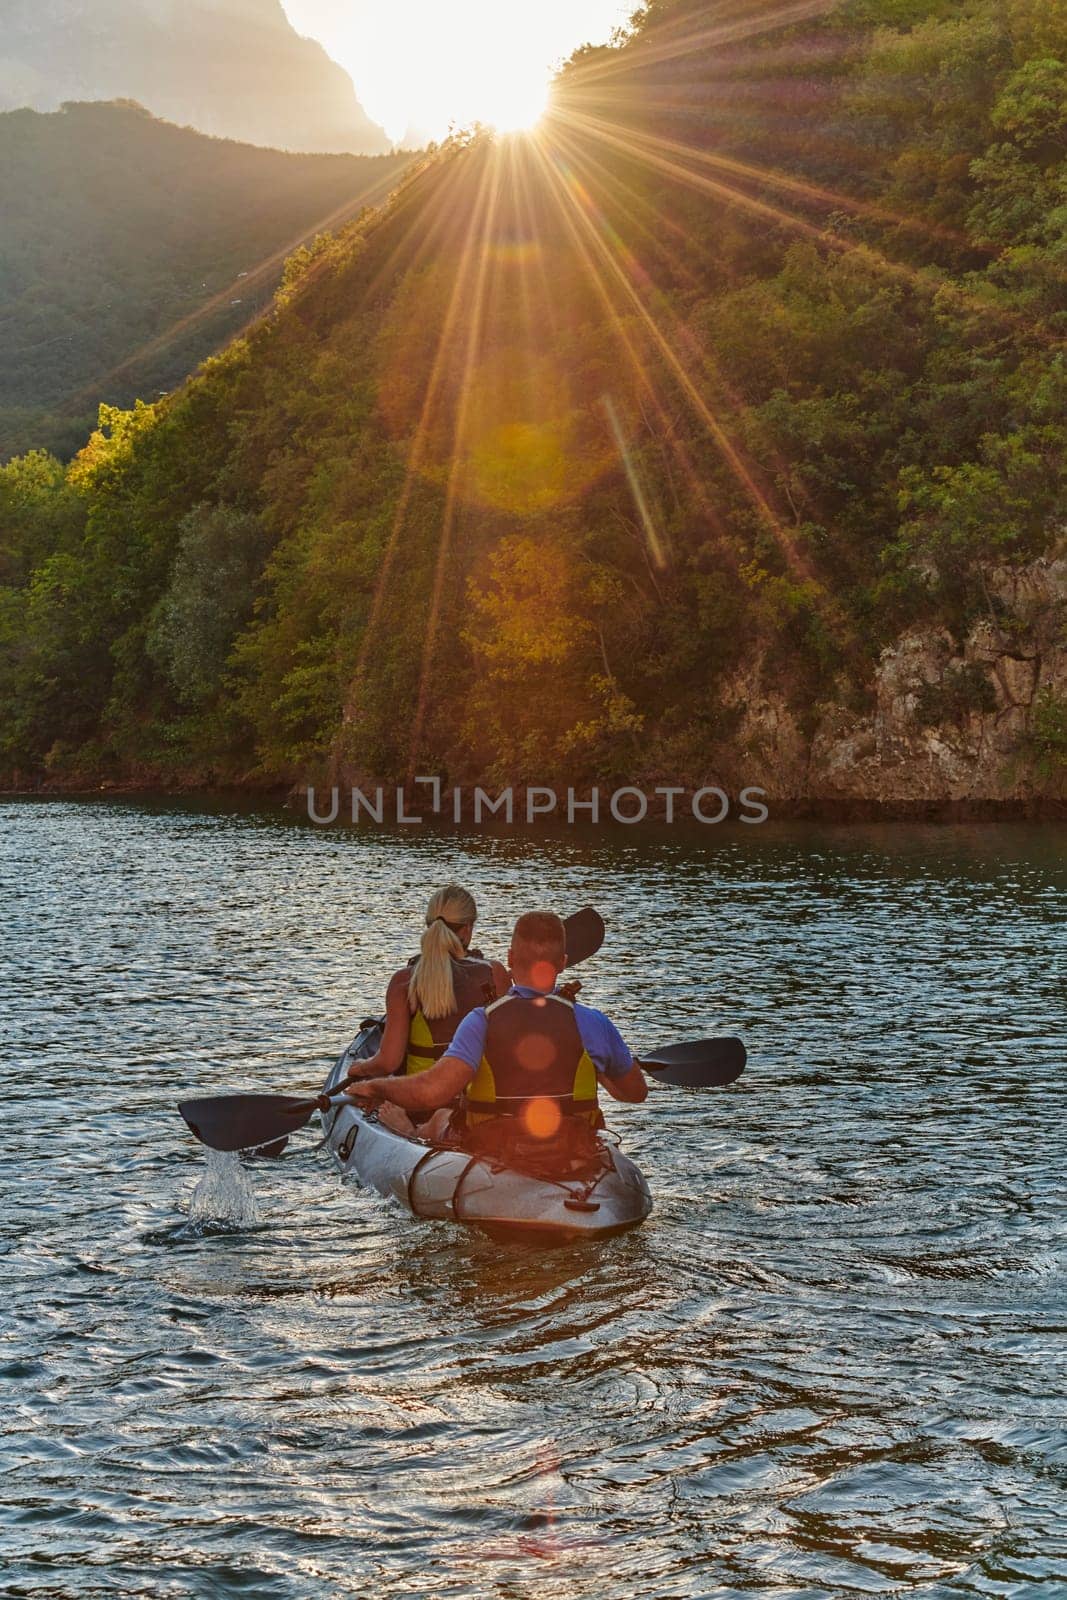 A young couple enjoying an idyllic kayak ride in the middle of a beautiful river surrounded by forest greenery in sunset time.